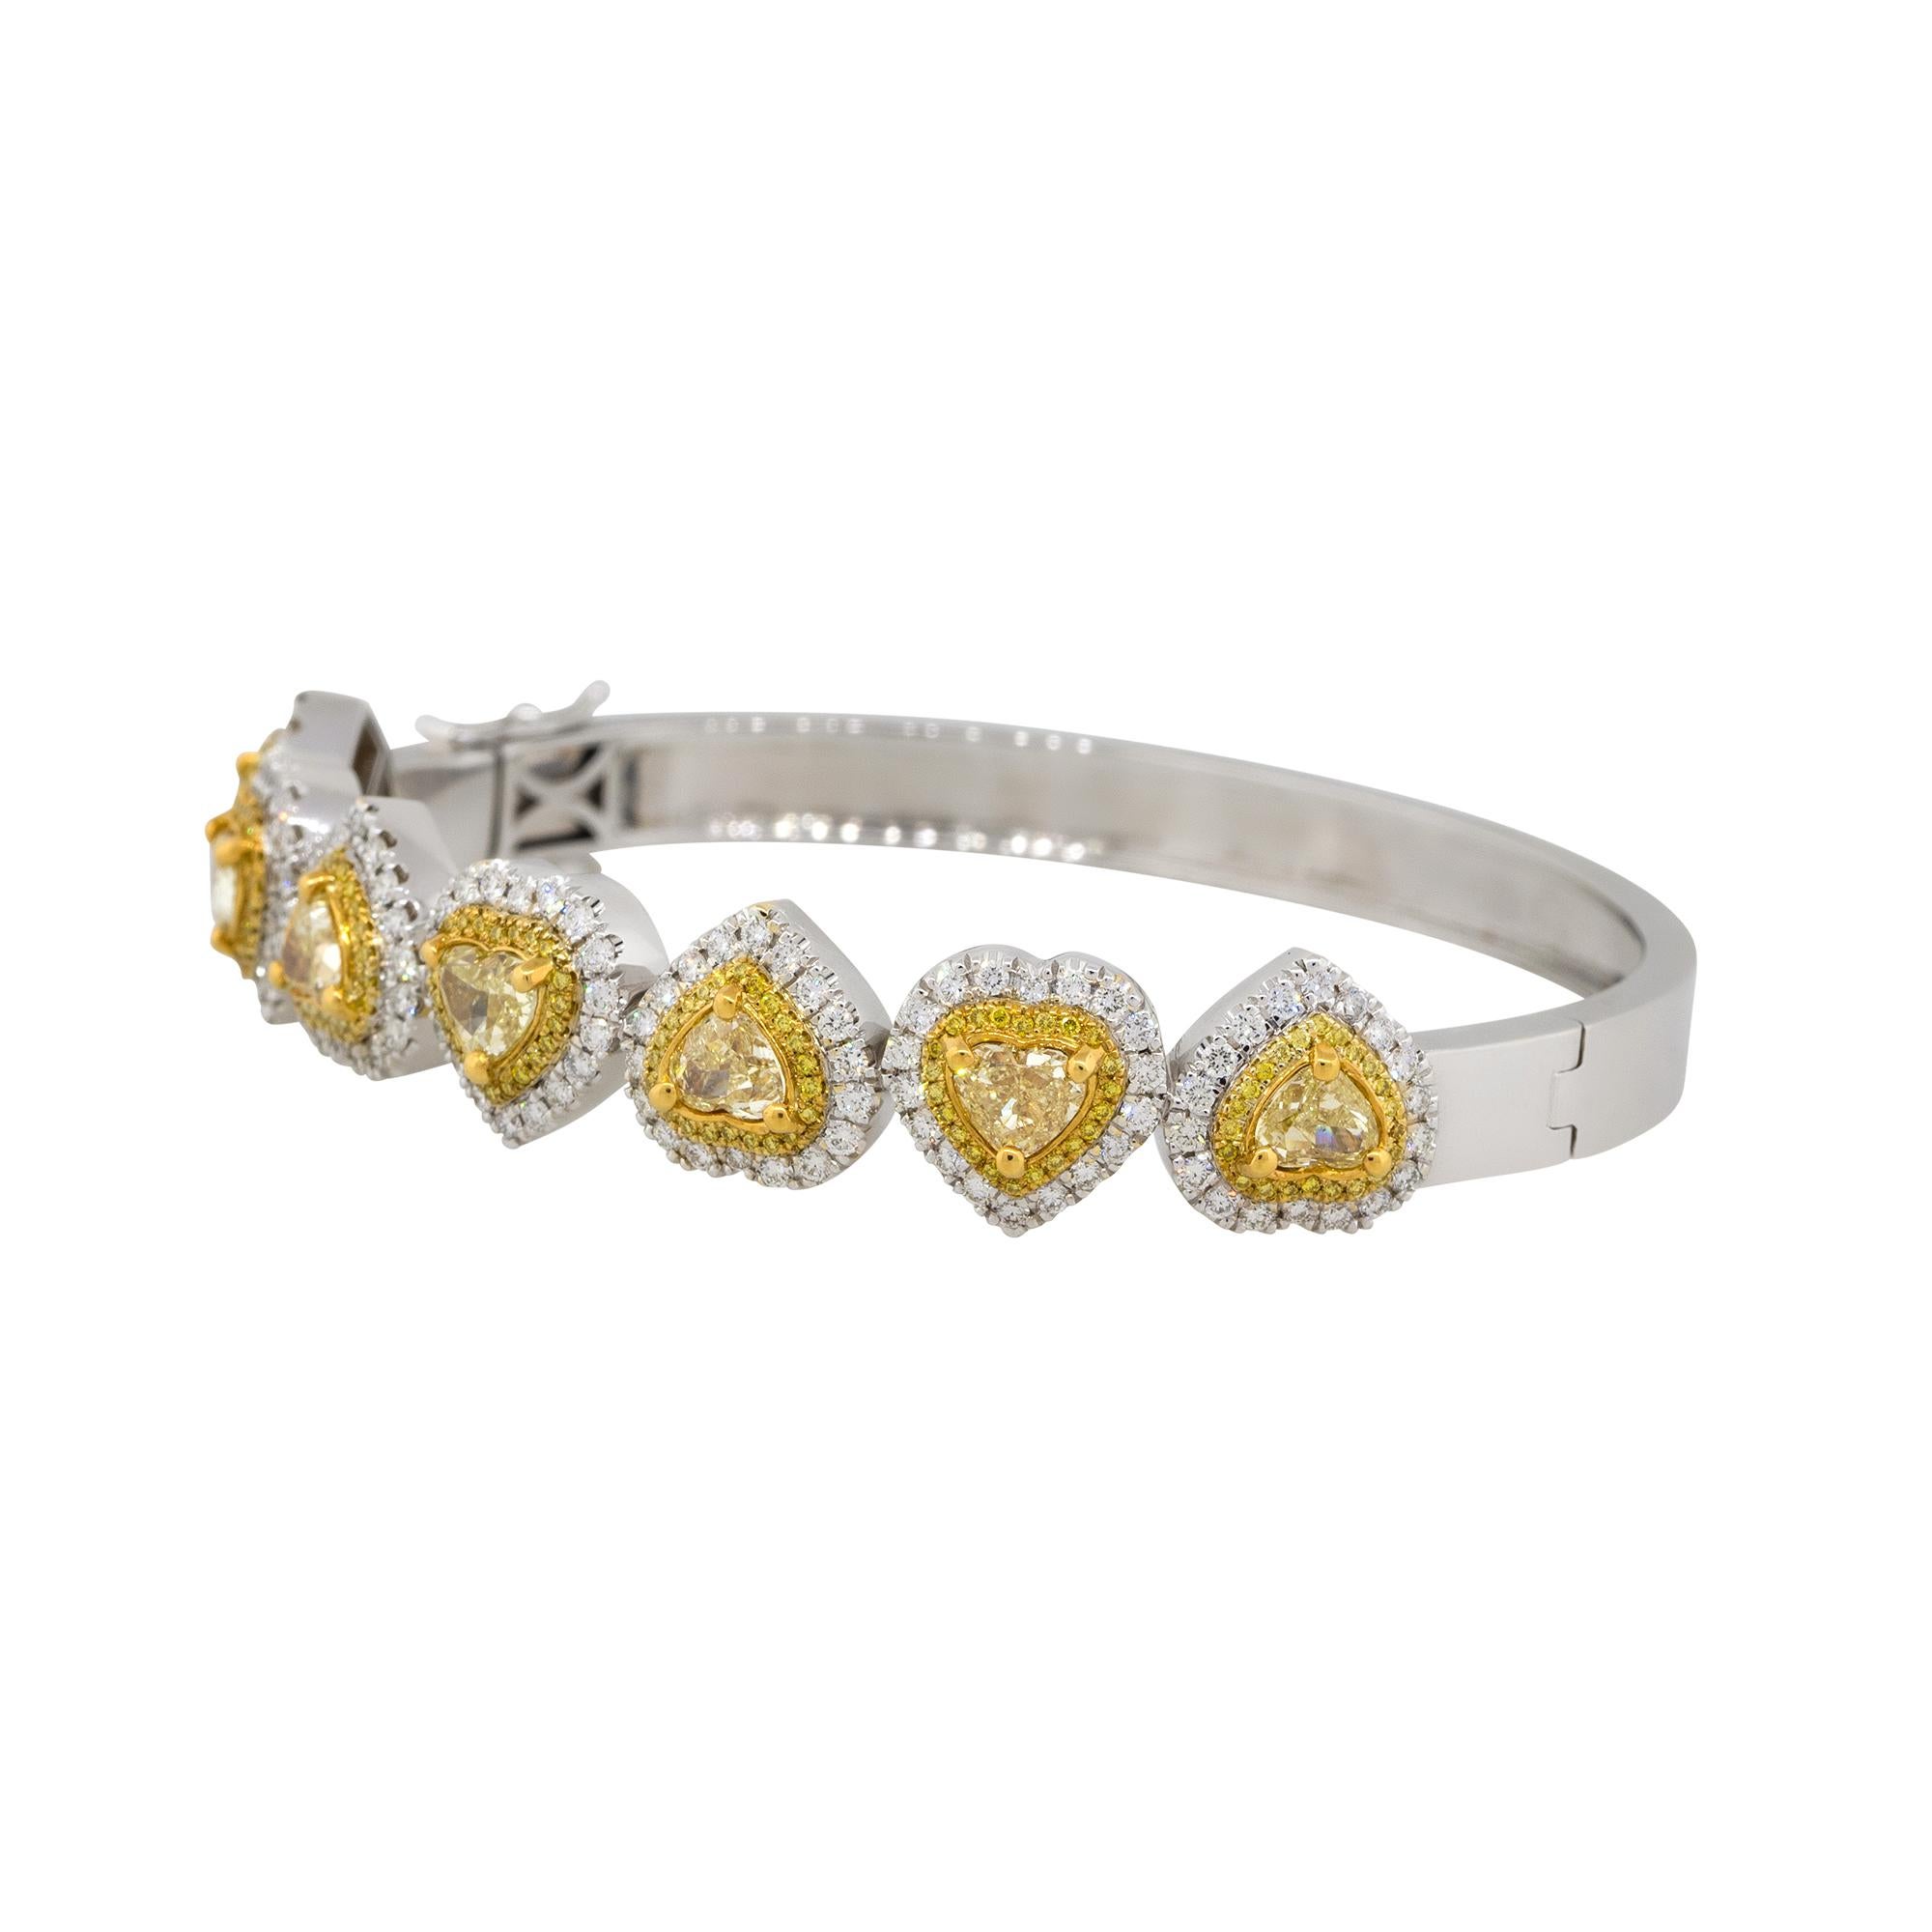 Material: 18k White Gold
Diamond Details: Approximately 5.84ctw round and heart shaped diamonds. Diamonds are H/I, Fancy Yellow in color and VS in clarity.
Clasps: Side tongue in box with safety
Total Weight: 37g (23.7dwt)
Length: 65mm x 12mm x